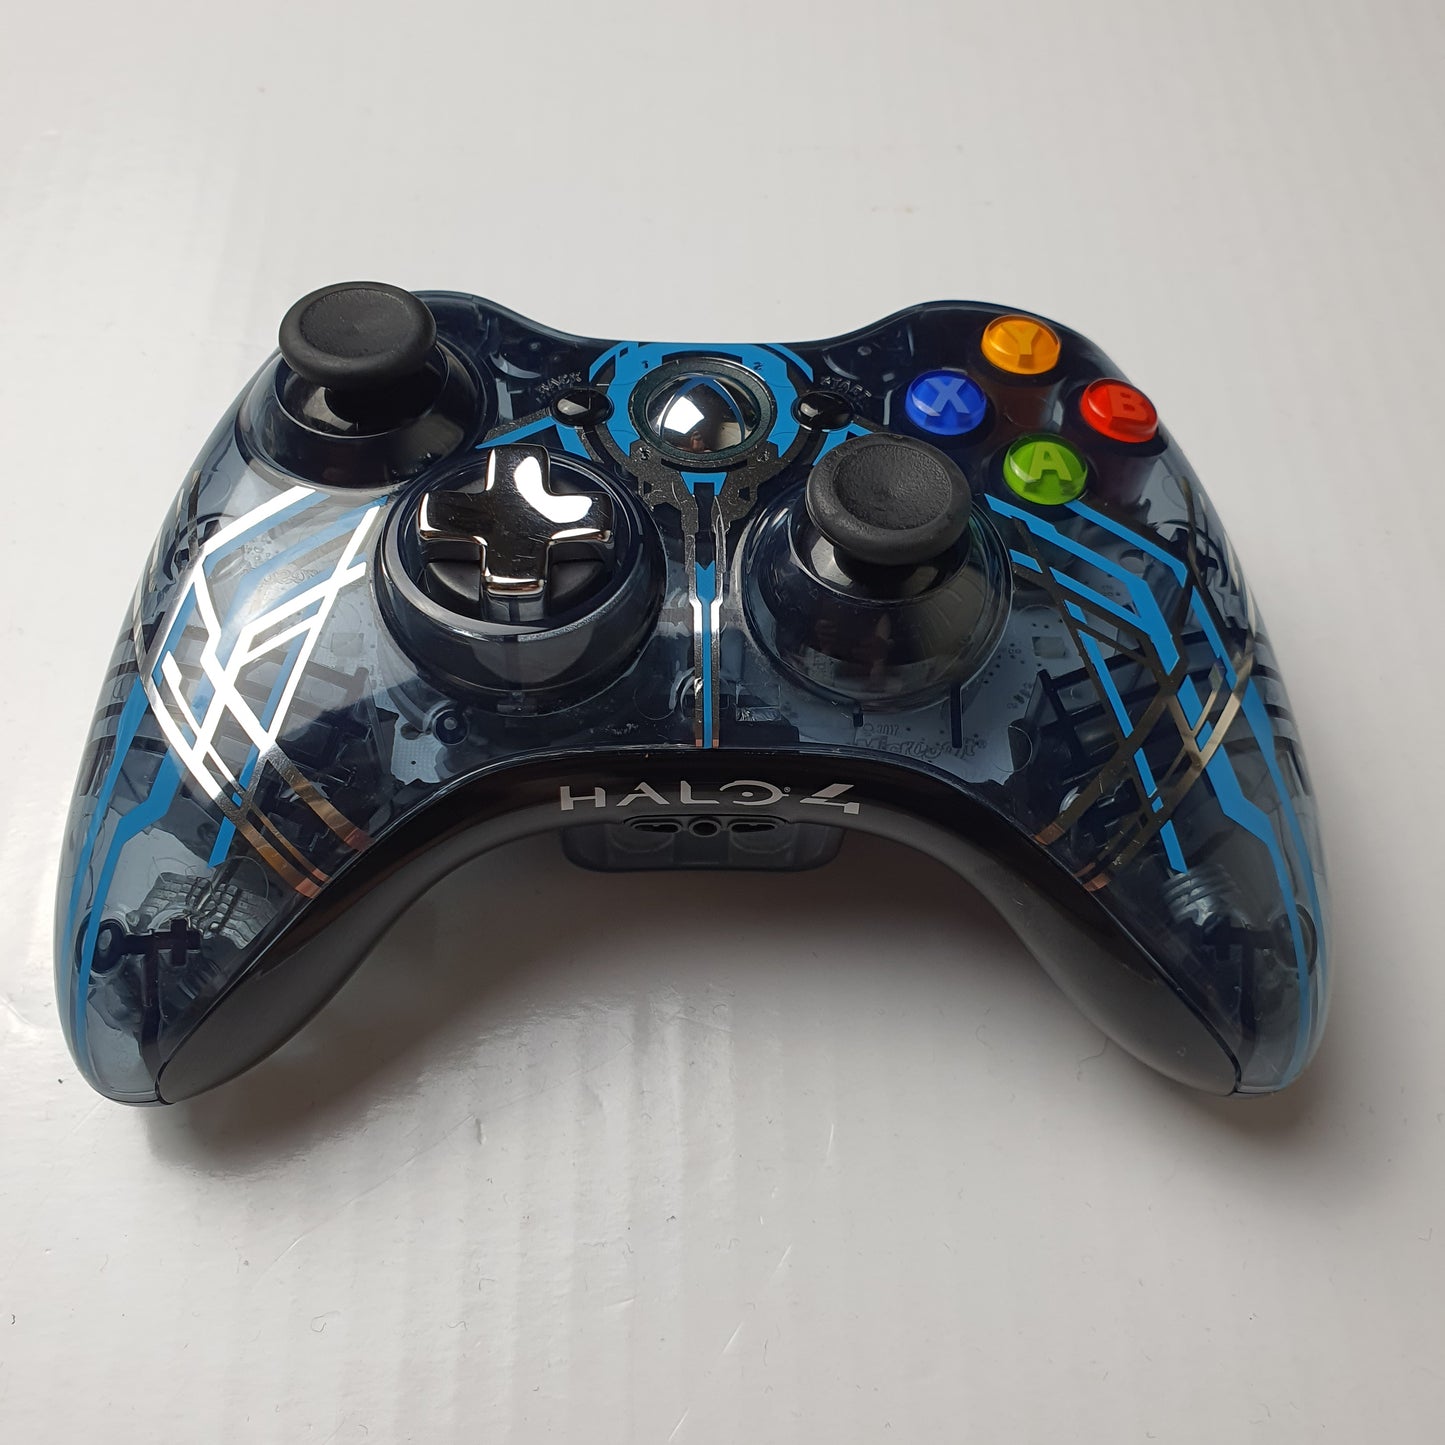 Official Microsoft Xbox 360 Limited Edition 'Halo 4: Forerunner' Wireless Controller